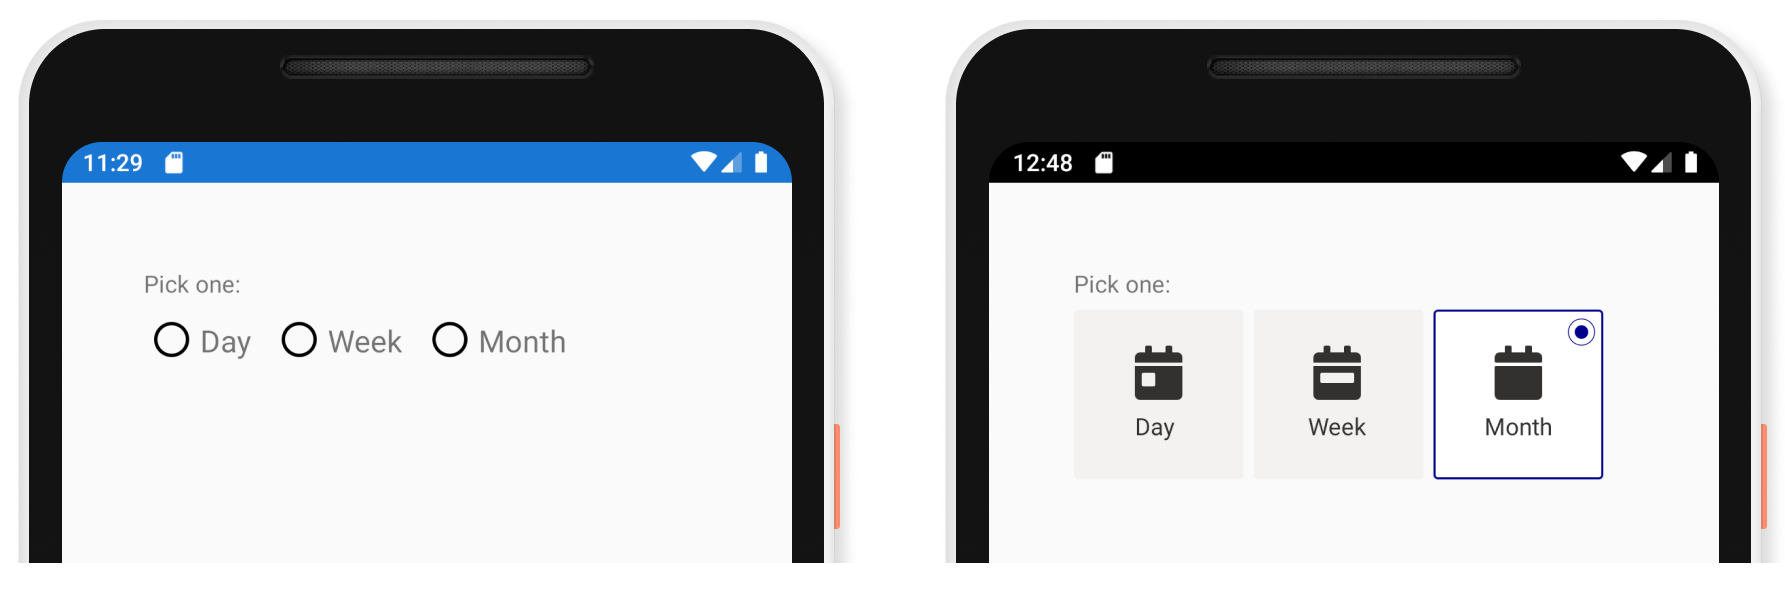 Image of radio buttons in a classic style and templated with calendar views